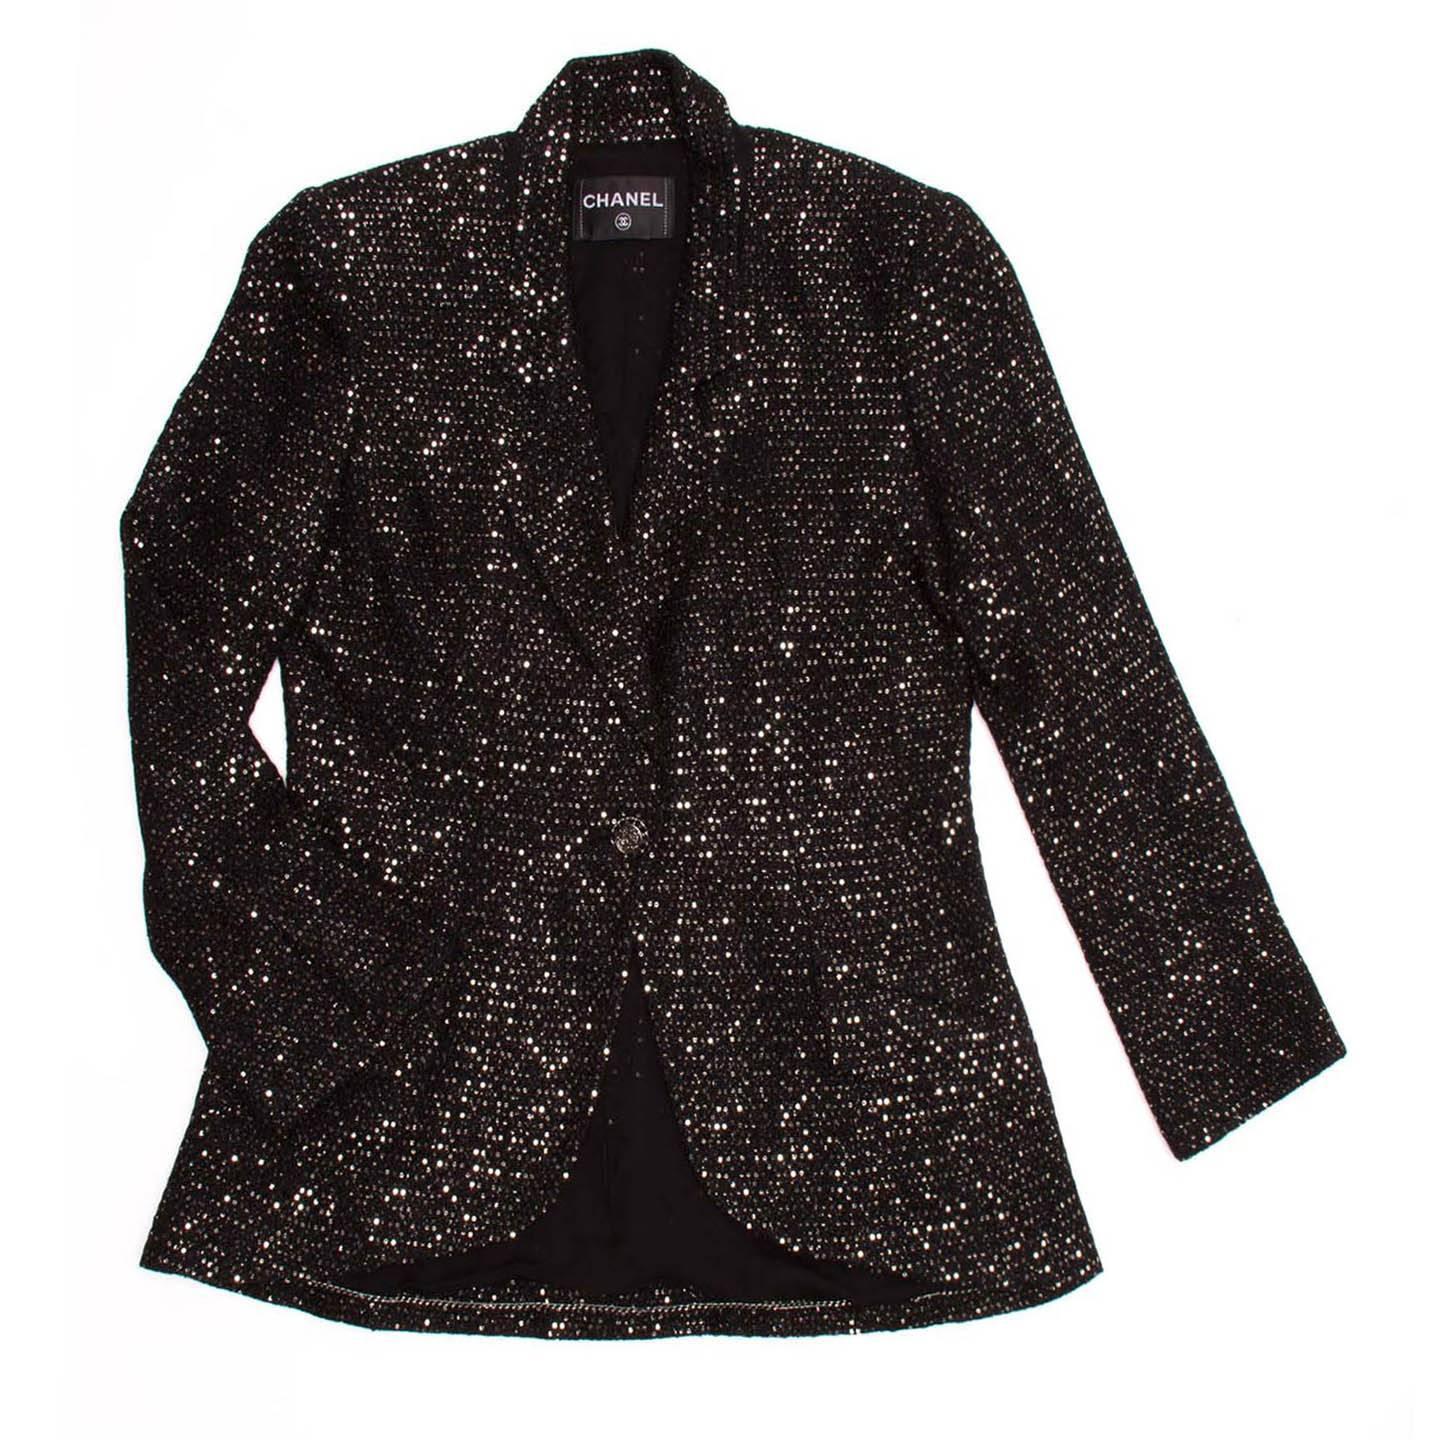 Black and gold sequin covered black wool tailored blazer with a single button closure and fold over cuff detail. 

Size  44 French sizing

Condition  Pristine and Excellent: never worn